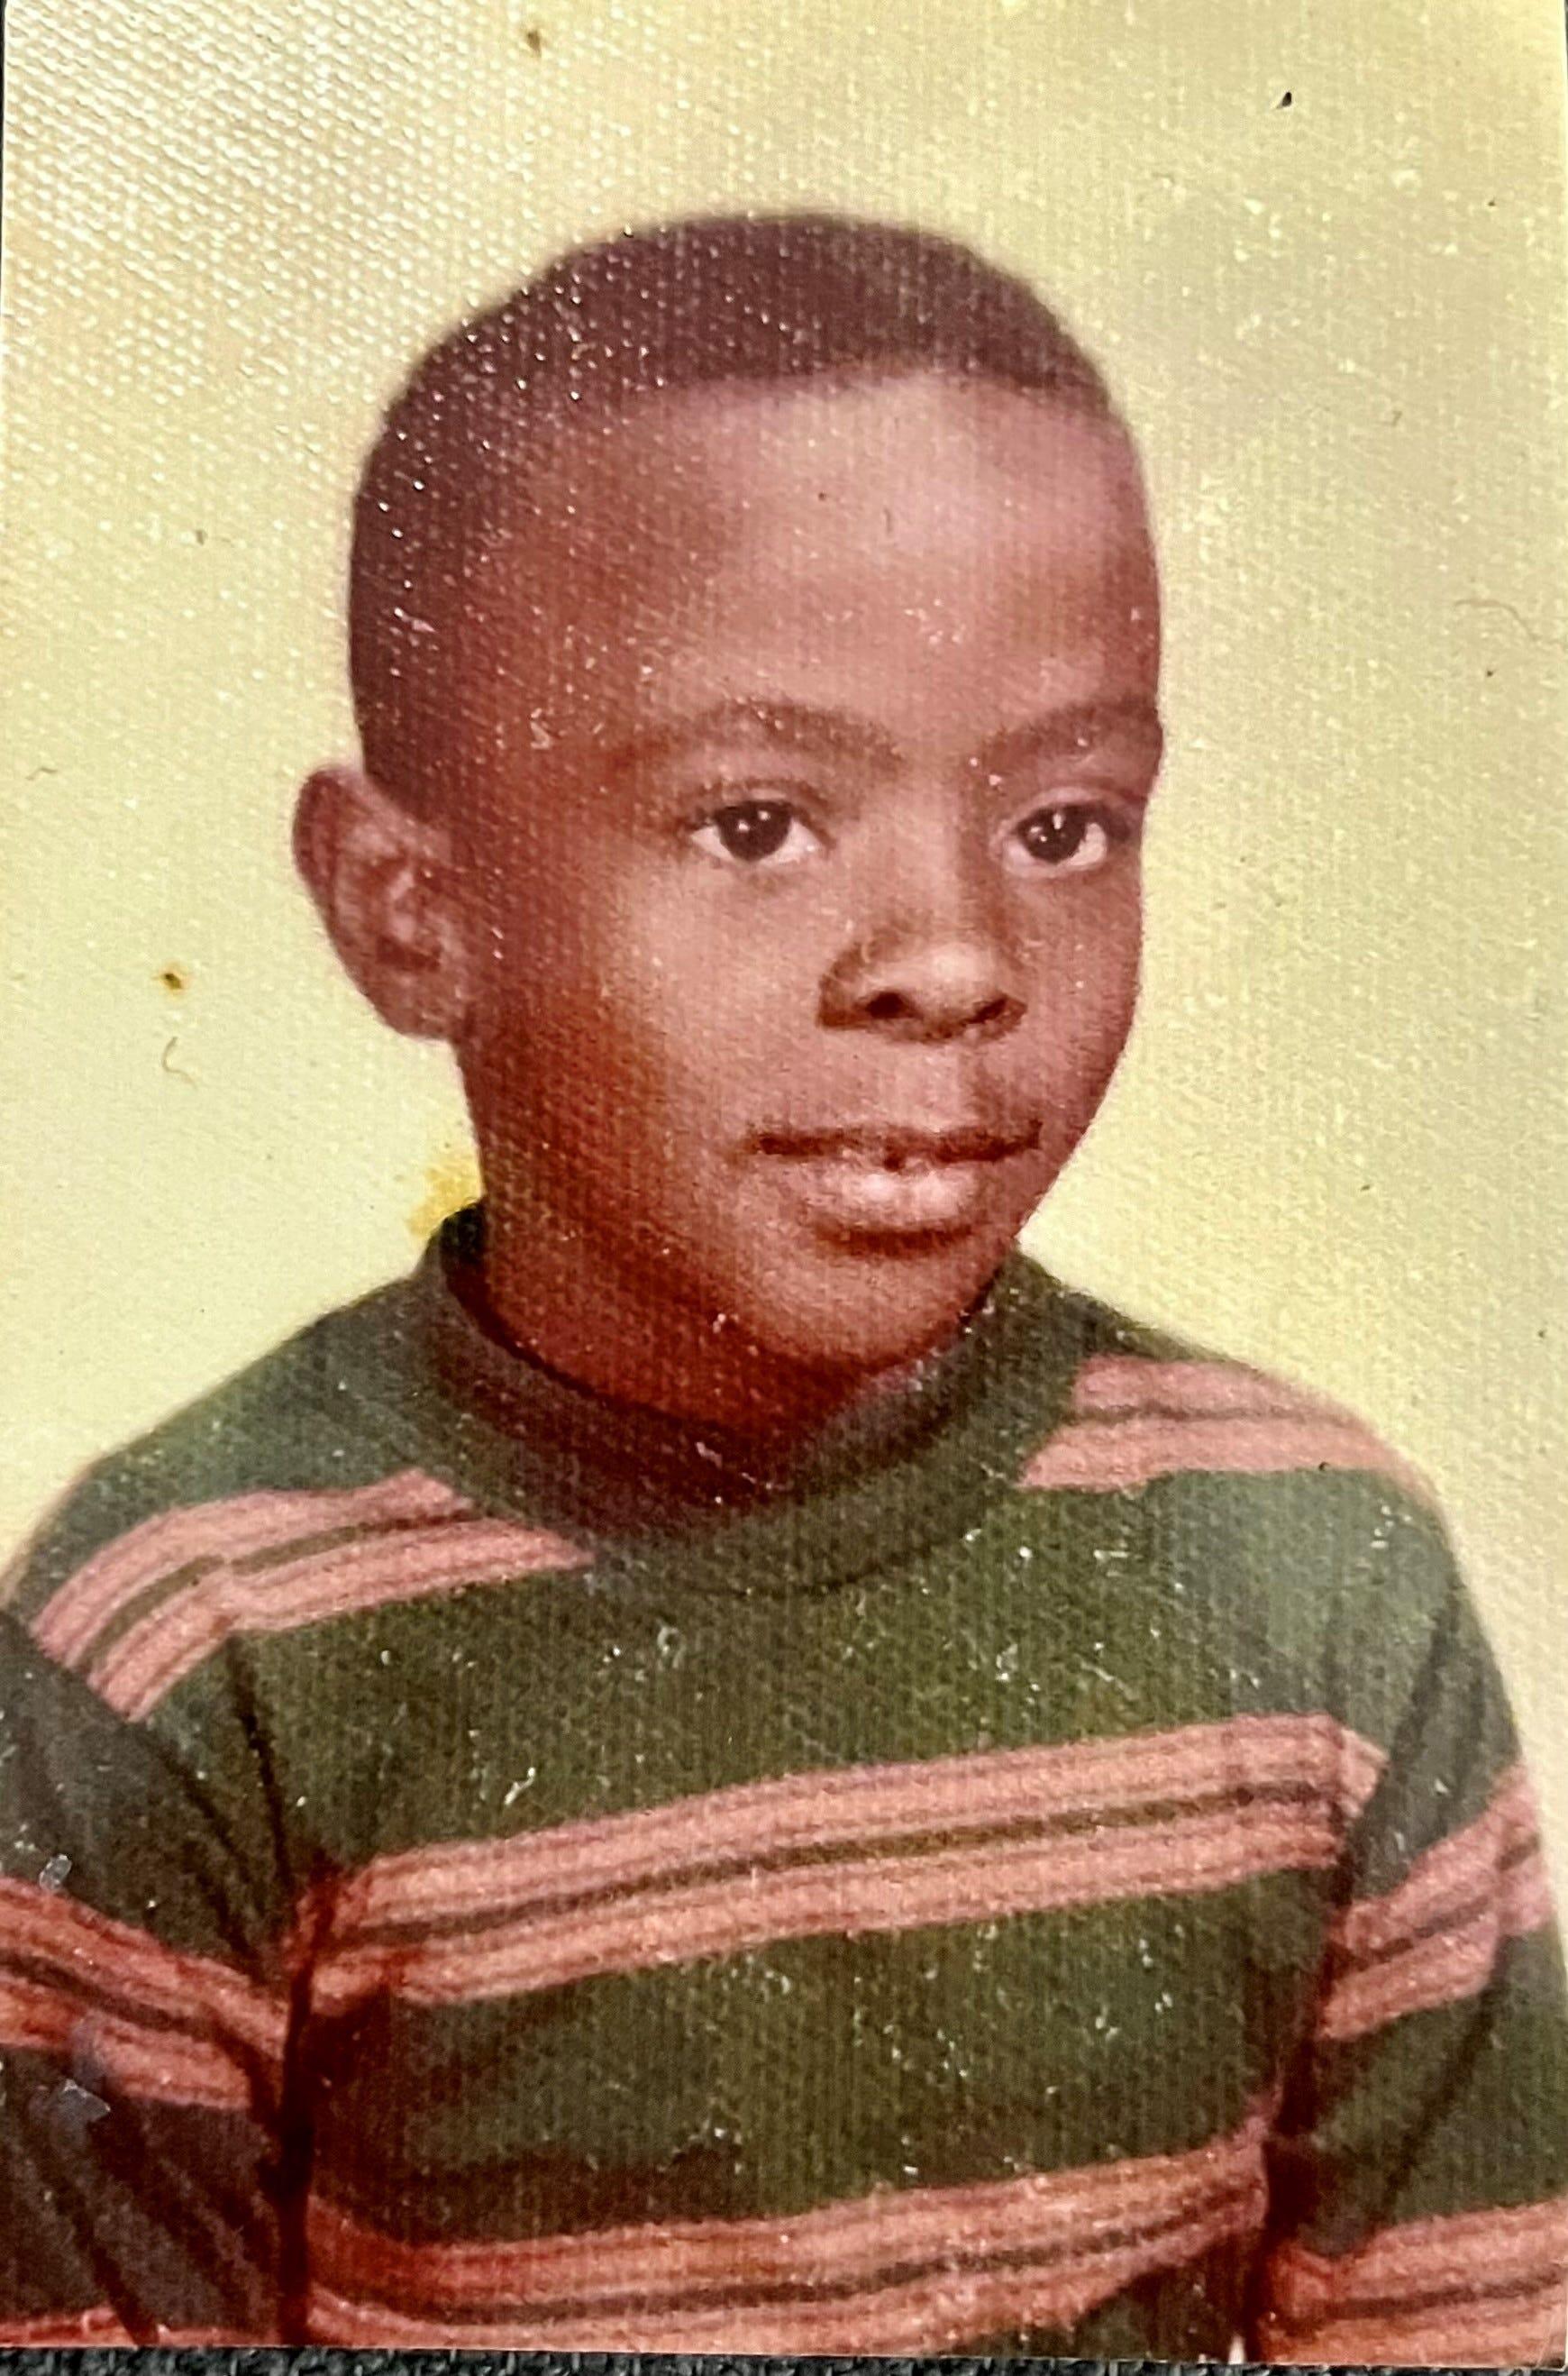 Todd Suttles, 6, as a first grader growing up in a farm town in northern Georgia